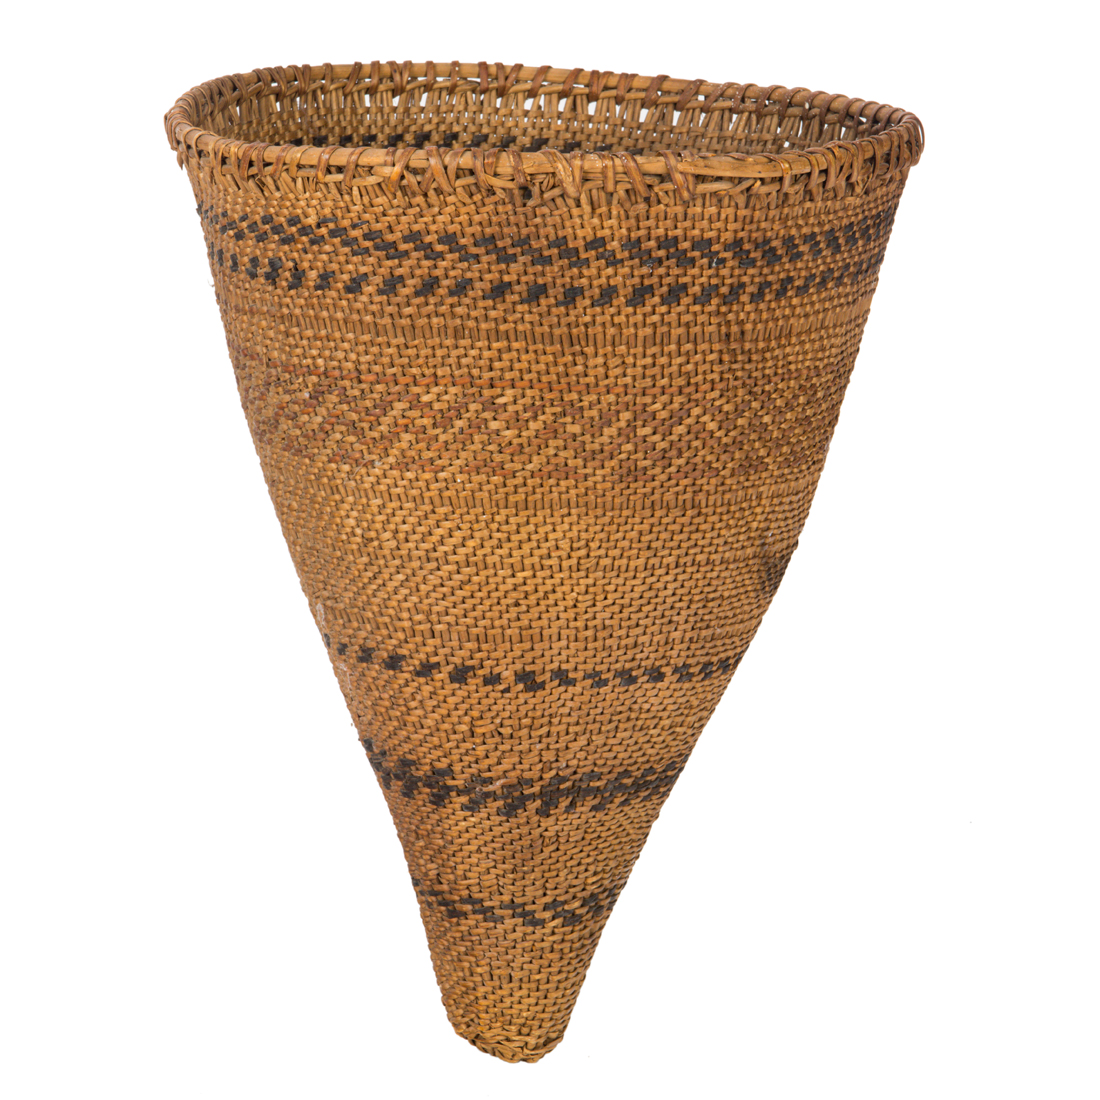 A WASHOE CONICAL COLLECTING BASKET 3a12c0